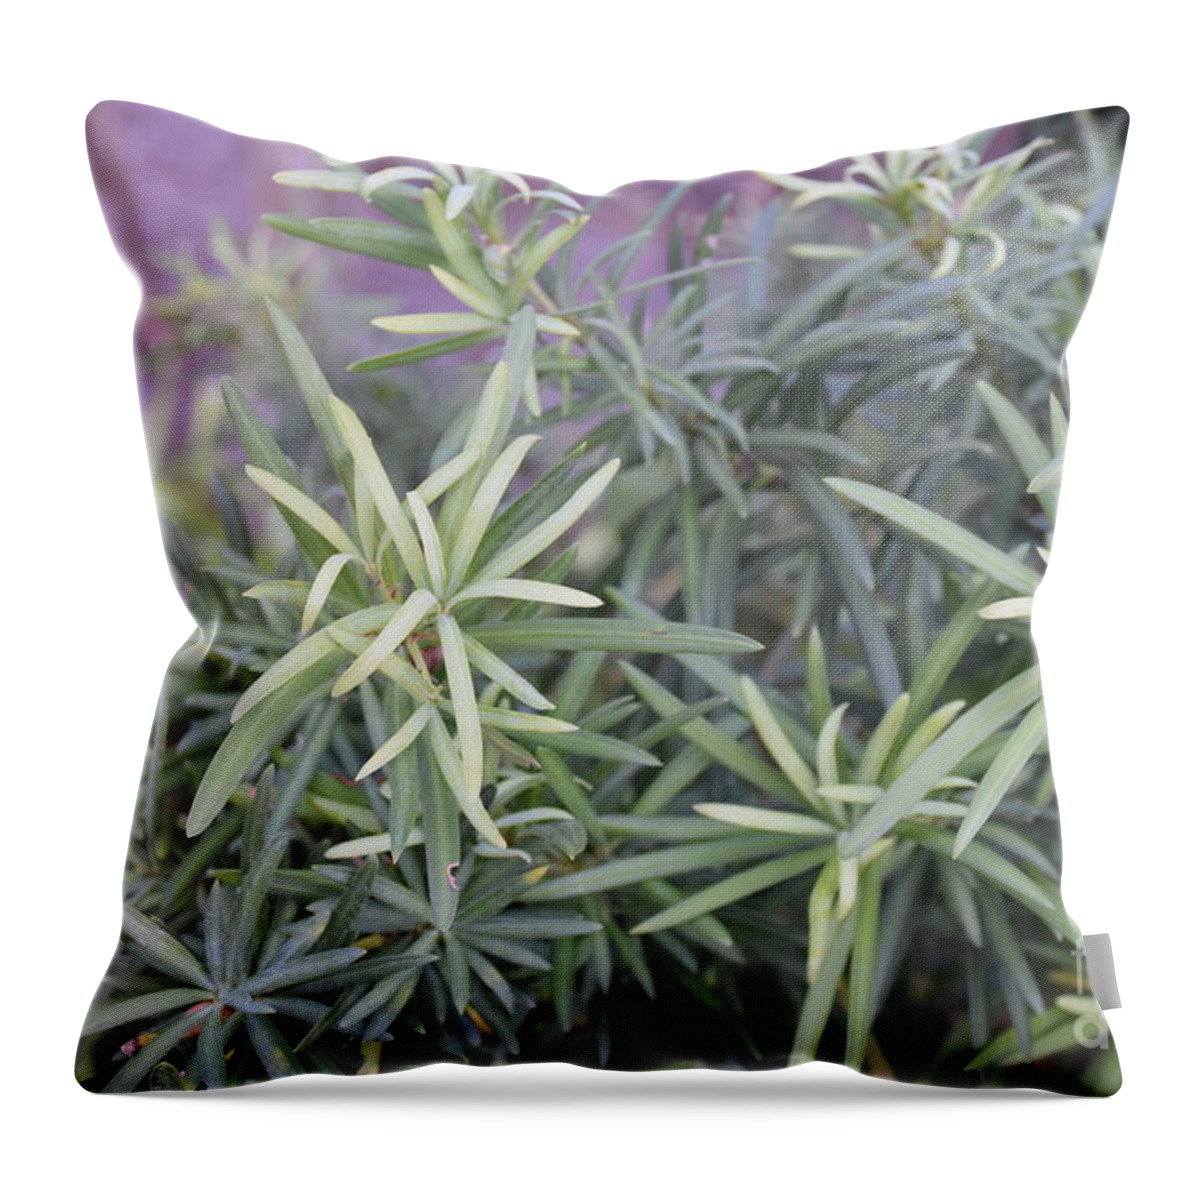 Photograph Of Green Plants Throw Pillow featuring the photograph Plants by Theresa Honeycheck